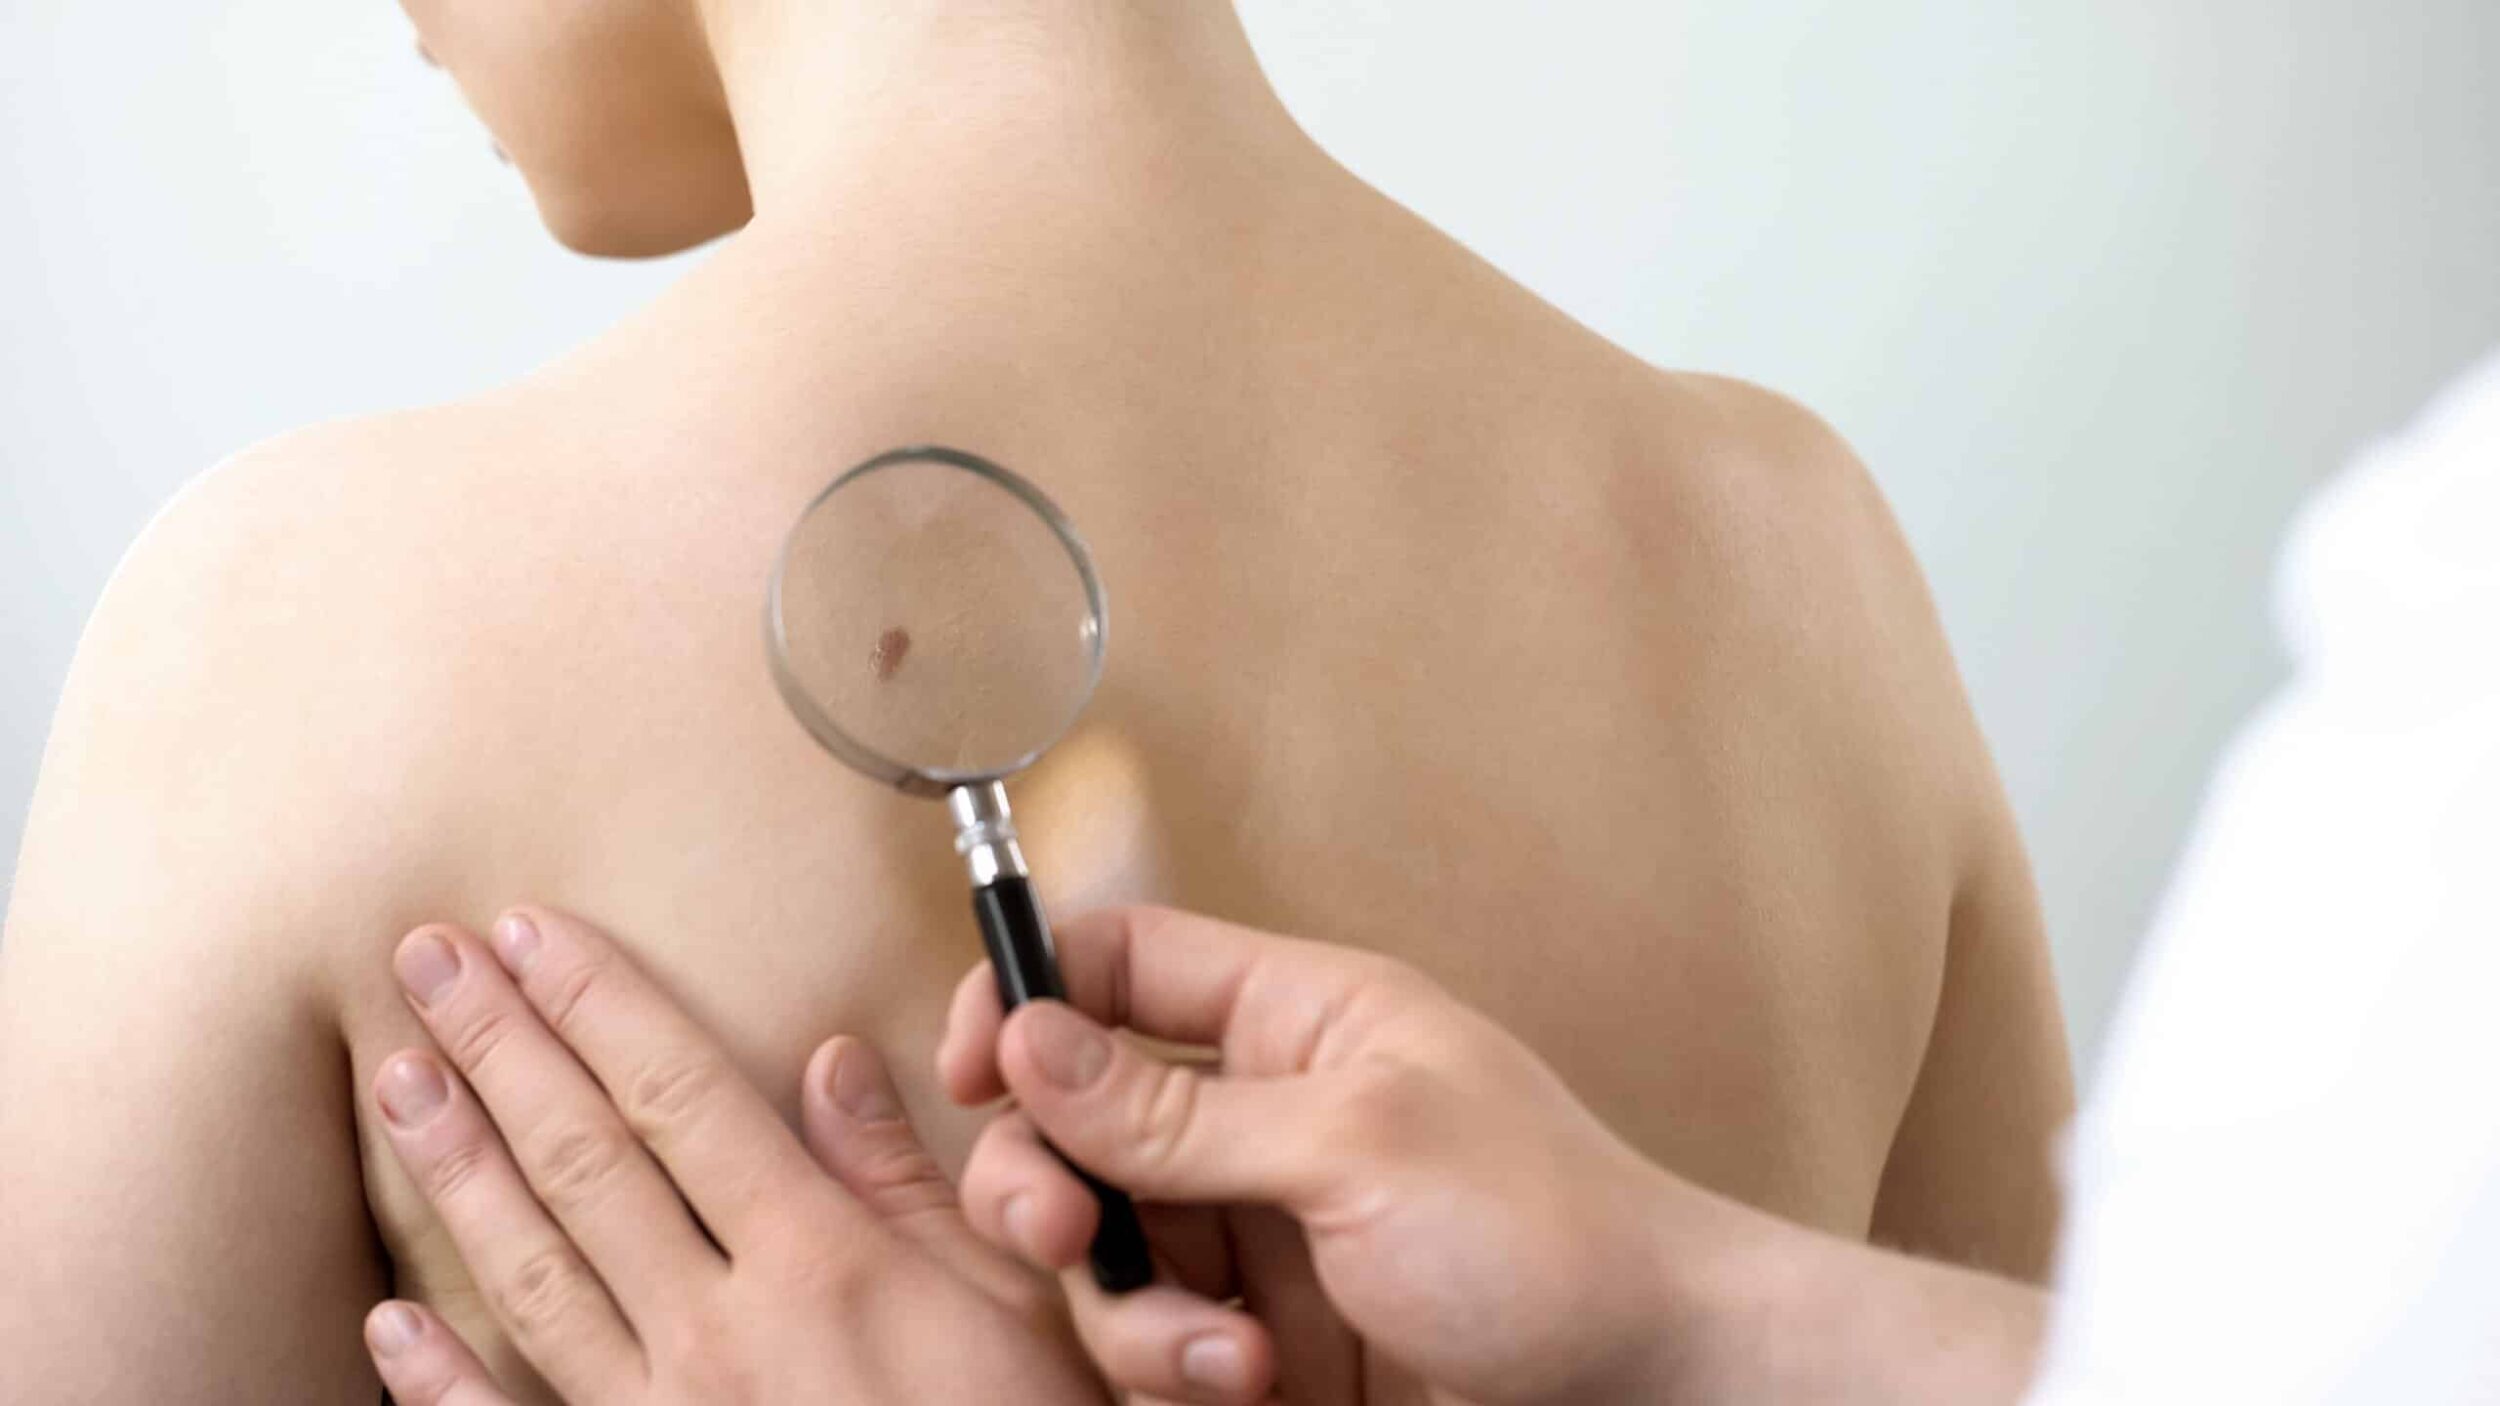 Dermatologist checking mole through magnifying glass, skin cancer prevention